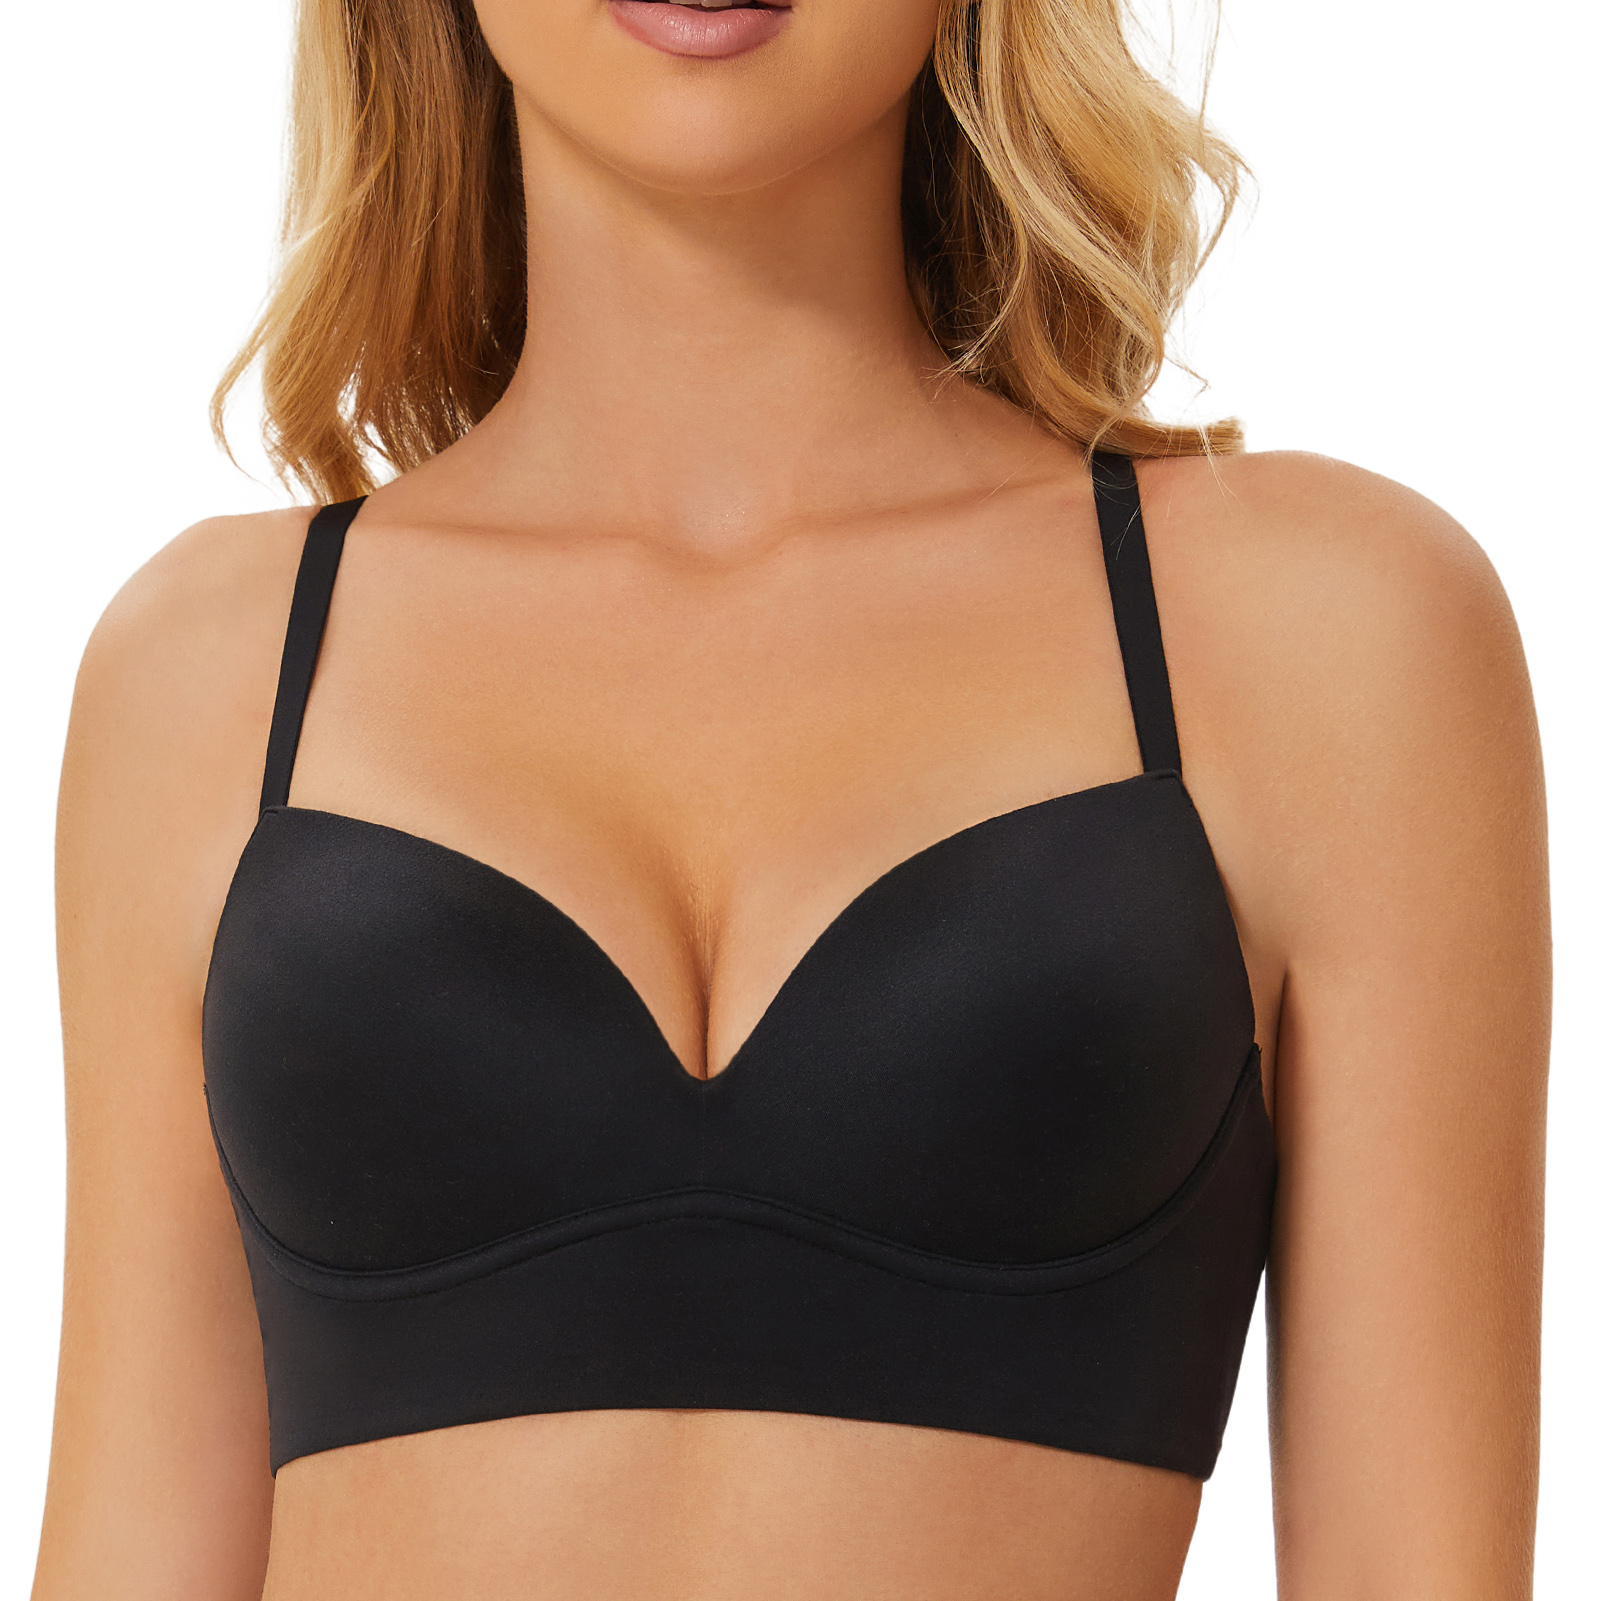 Padded Bras, Bralettes, Push-Up, Wireless & More